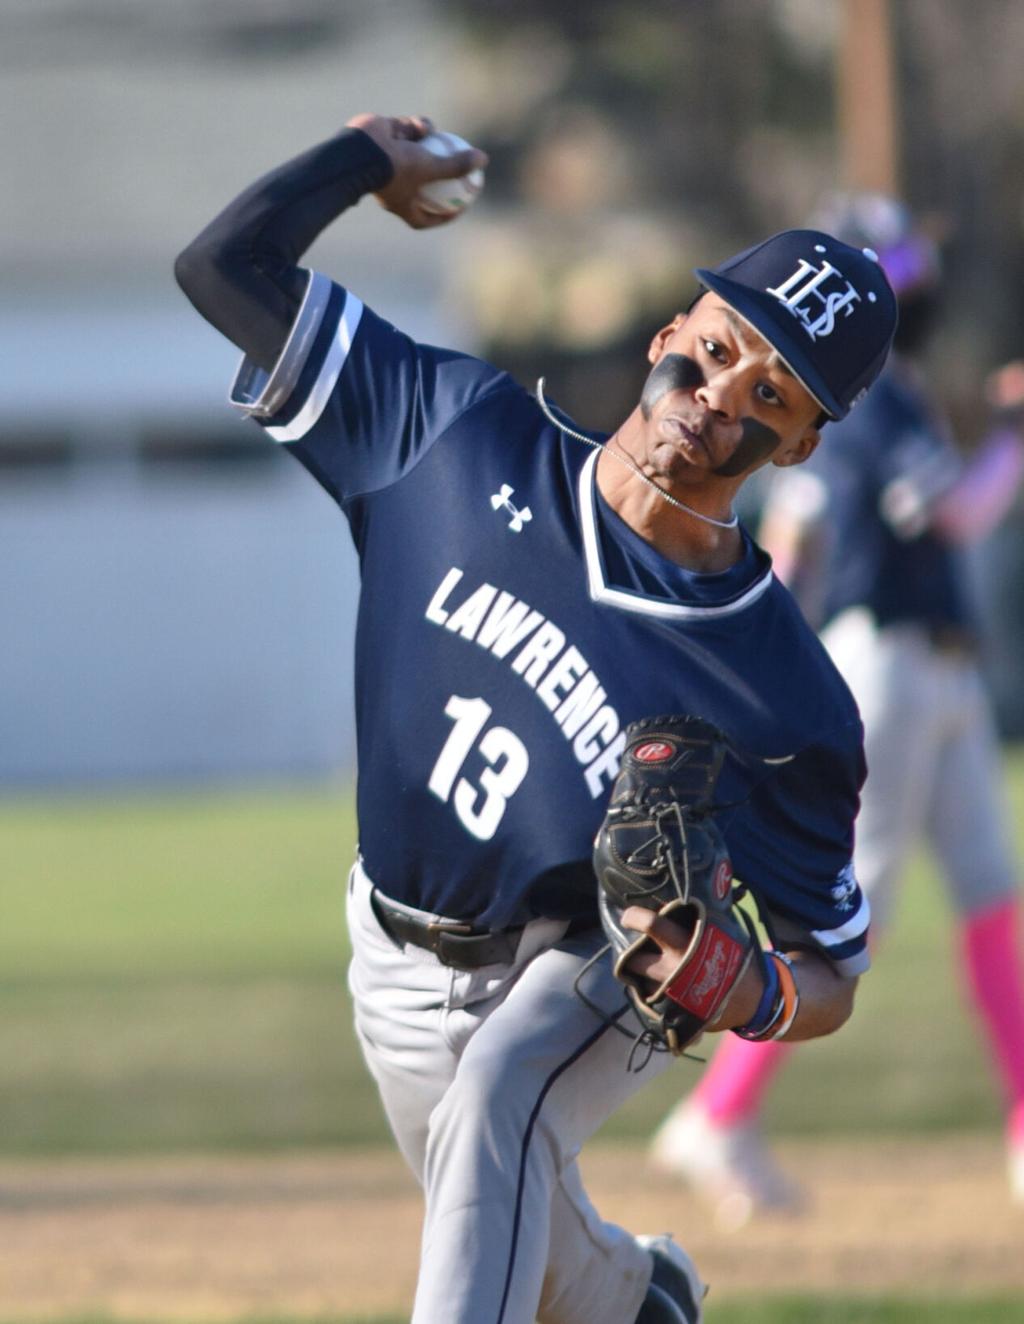 High School roundup: Lawrence pounds Central; Aquino walks it off for Hillies